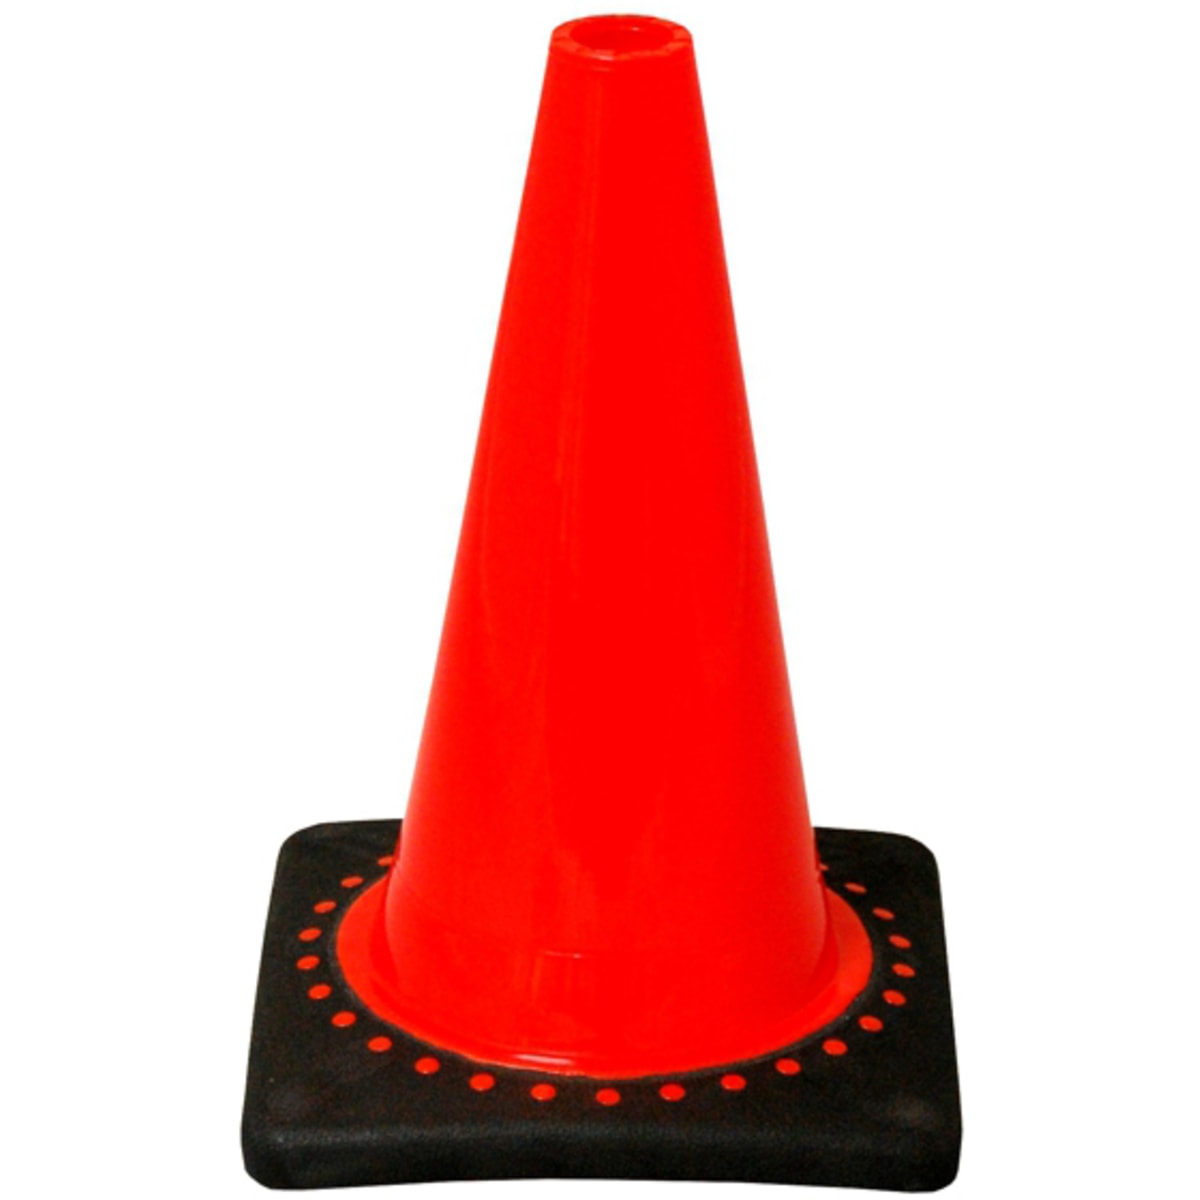 Road Traffic or Hazard Durable. 12 “ for Soccer 10 Pack Pro Image Orange Safety Cones Sports